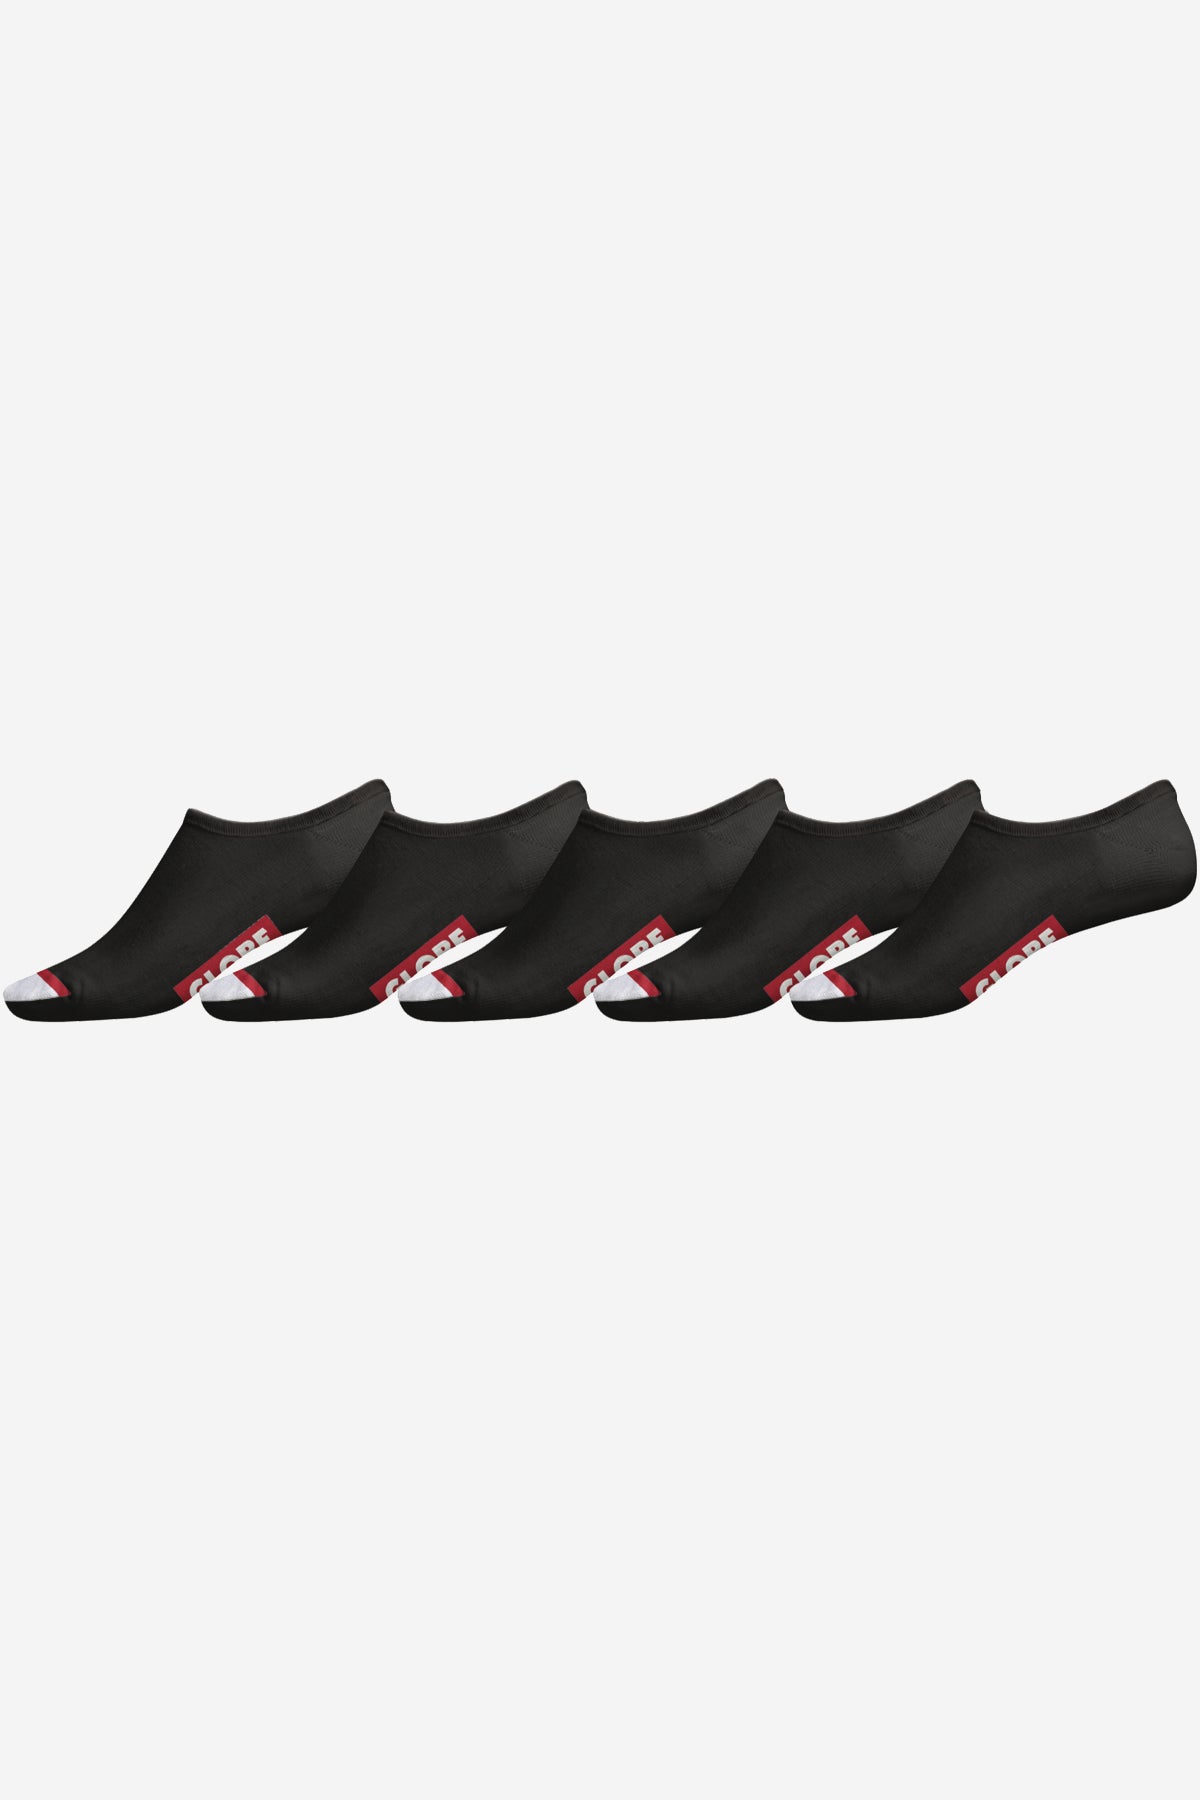 tipper invisible sock 5 pack black